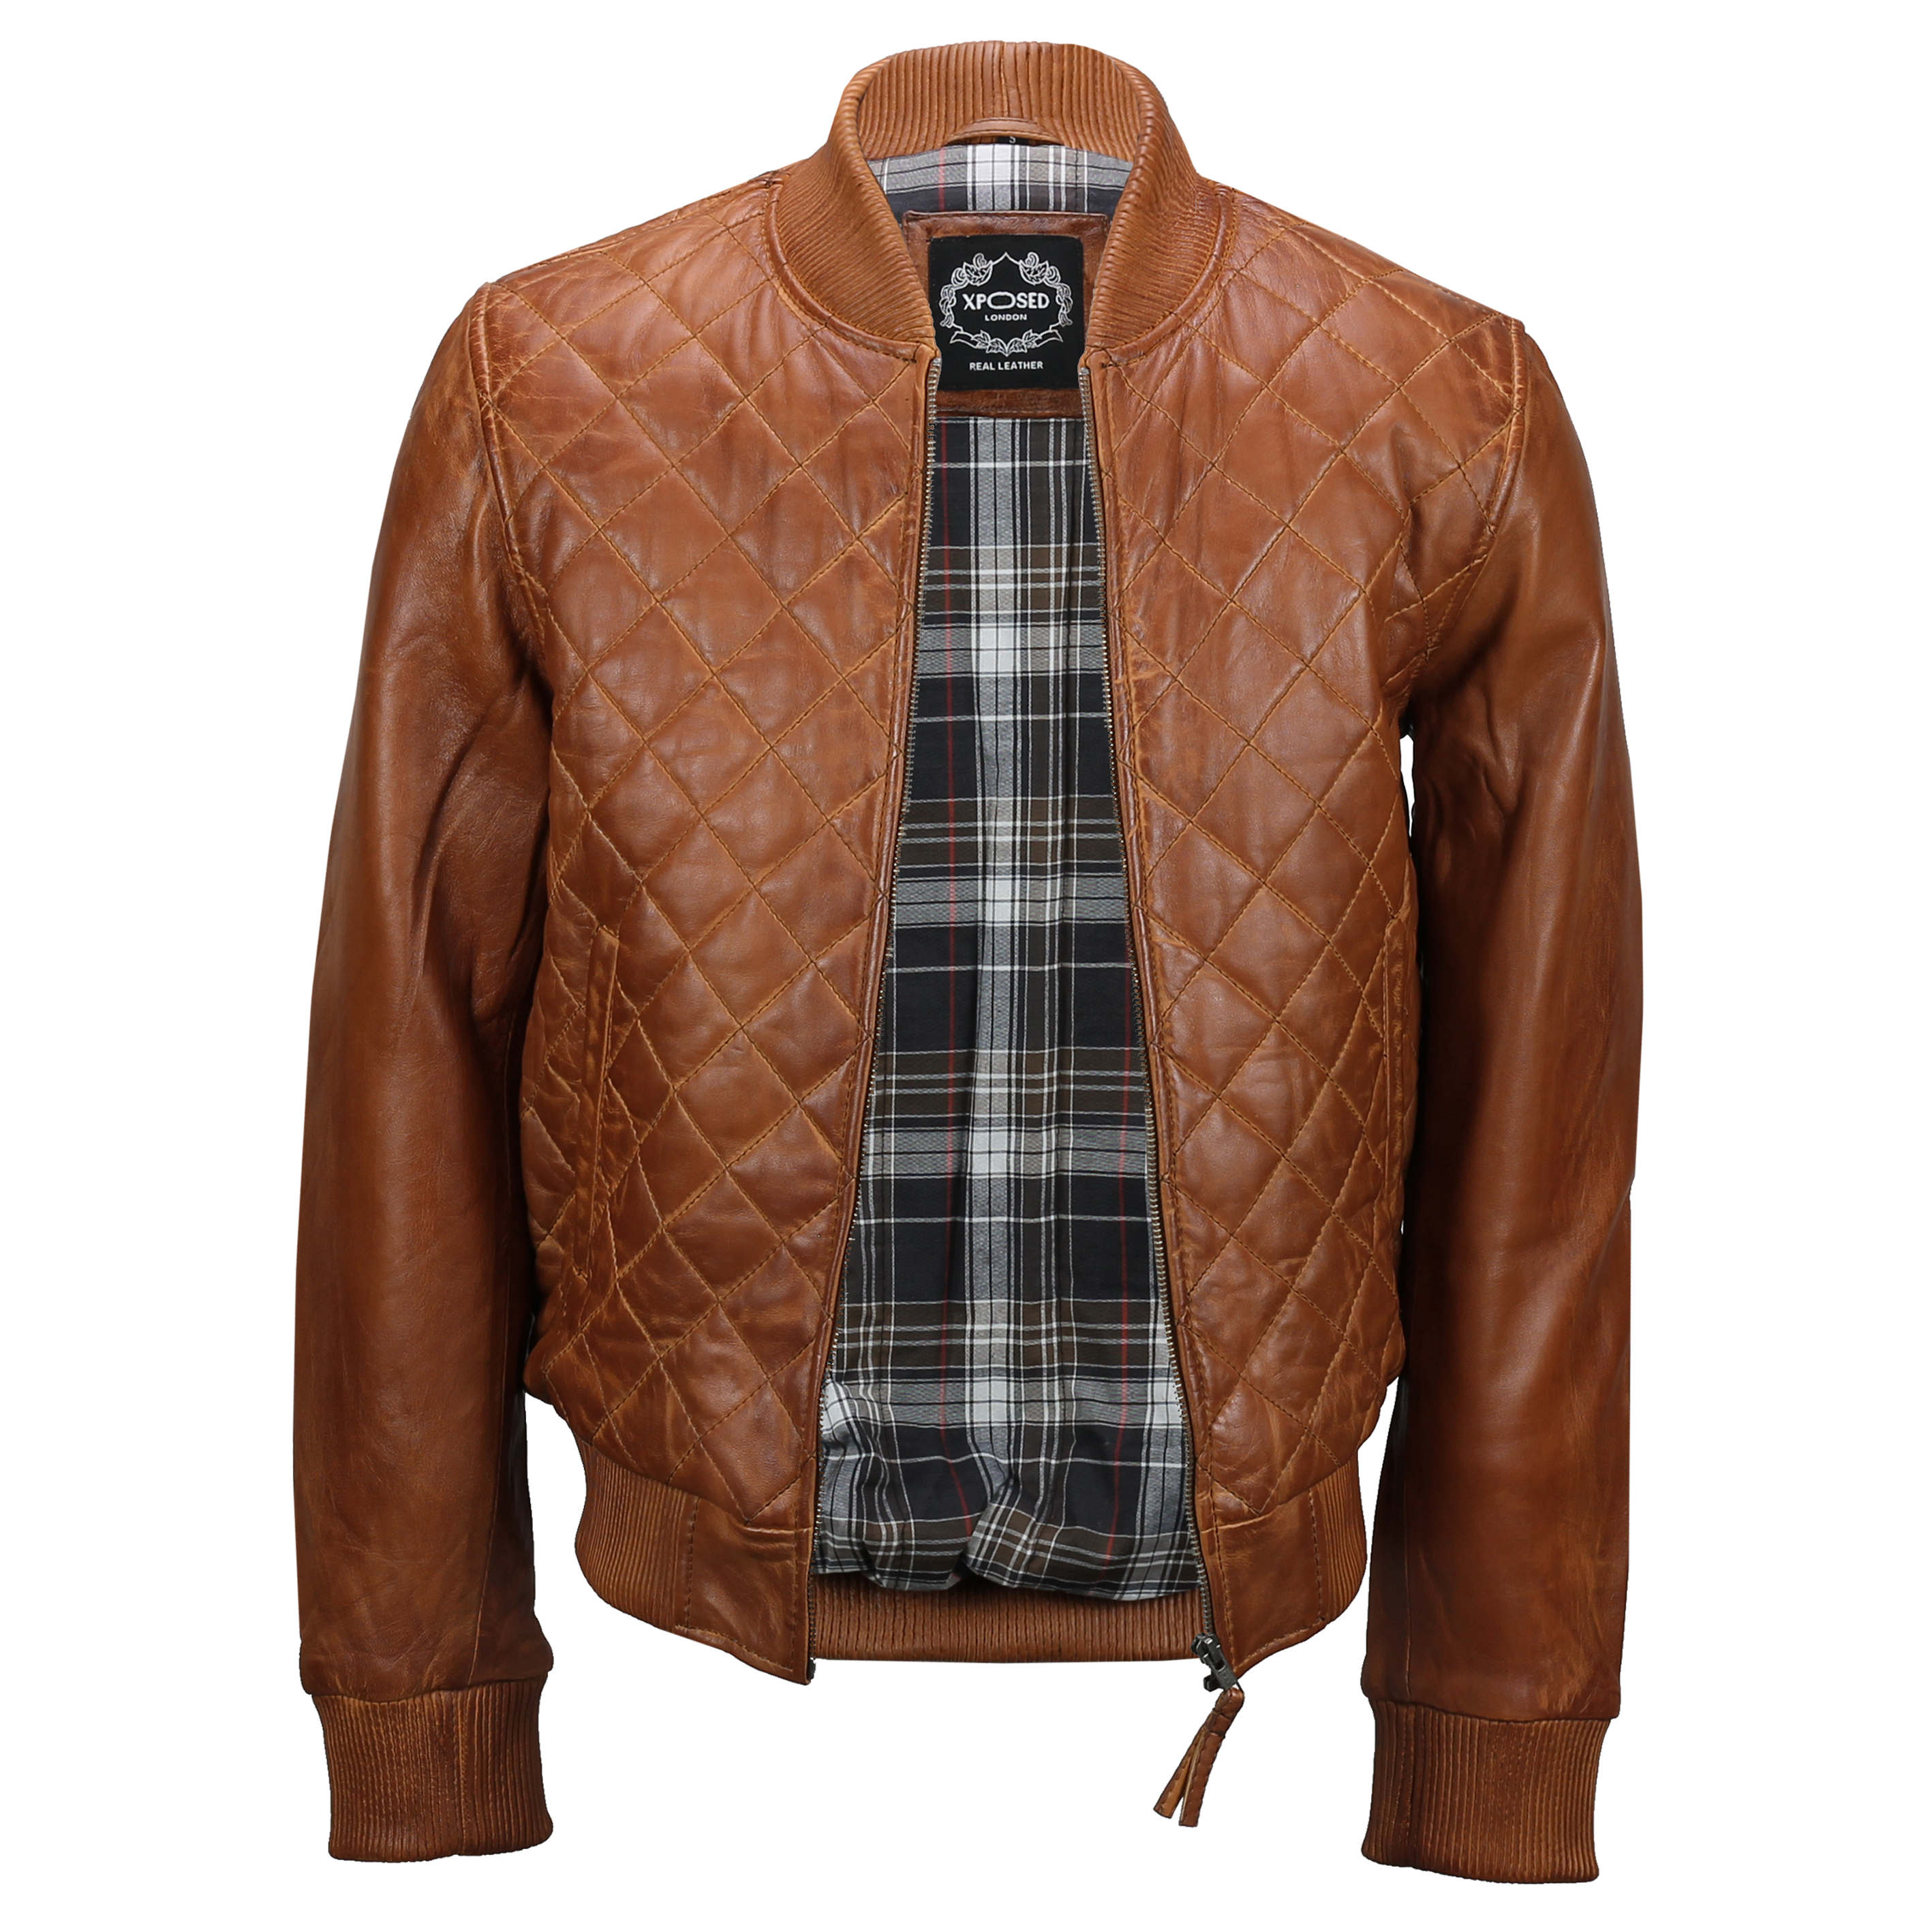 Mens Classic Tan Brown Real Leather Cross Quilted Bomber Jacket Vintage Biker